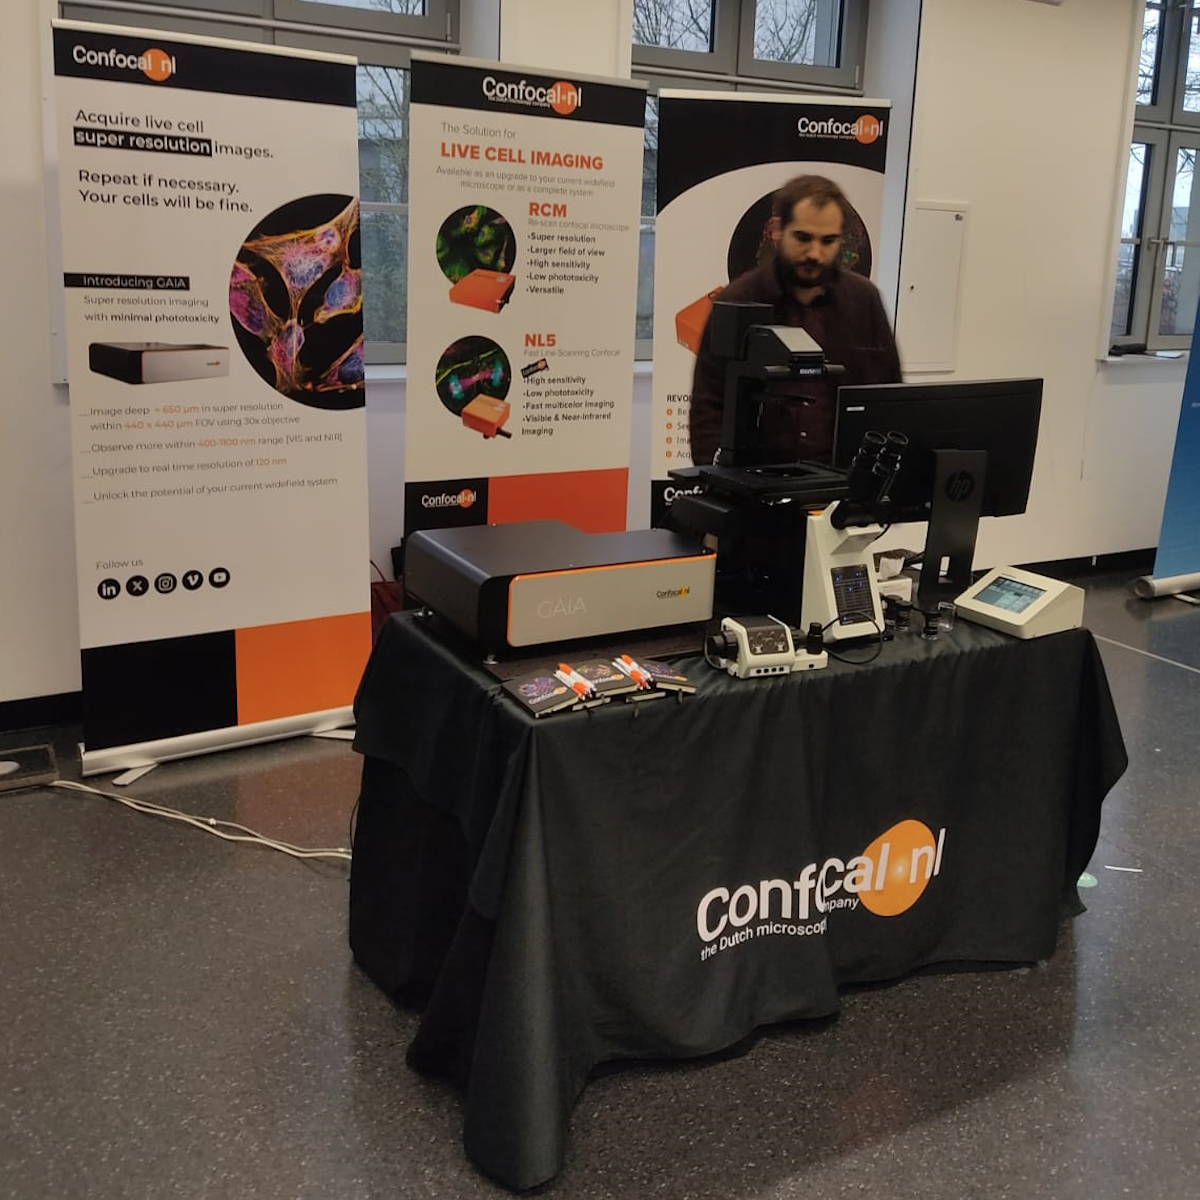 We are ready for ICON-Europe 2024! Visit our booth to experience deep cell super resolution imaging with 𝐆𝐀𝐈𝐀 and discover how you can achieve minimum phototoxicity with our 𝑅𝐸scan technology. #livecellimaging #confocal #minimumphototoxicity #microscopy #confocal #biotech